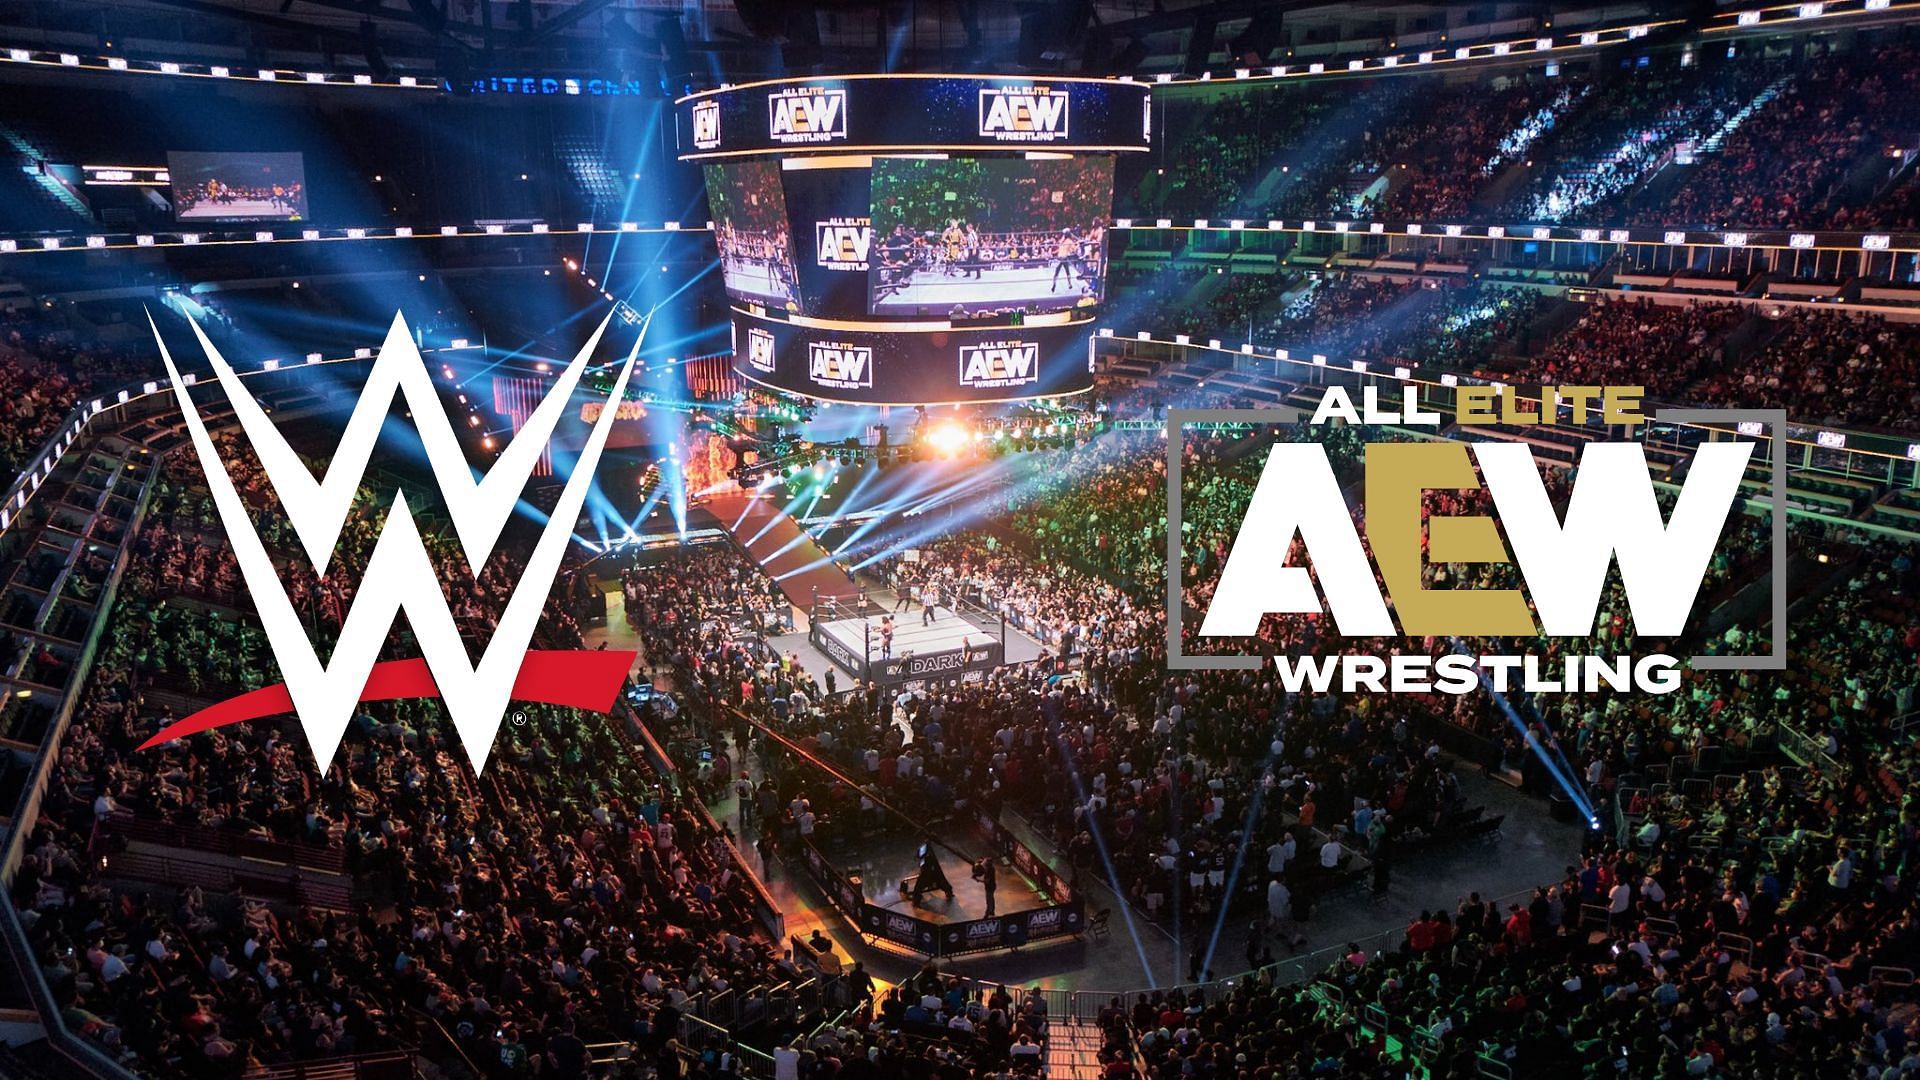 Which AEW star would like to wrestle for WWE one day?